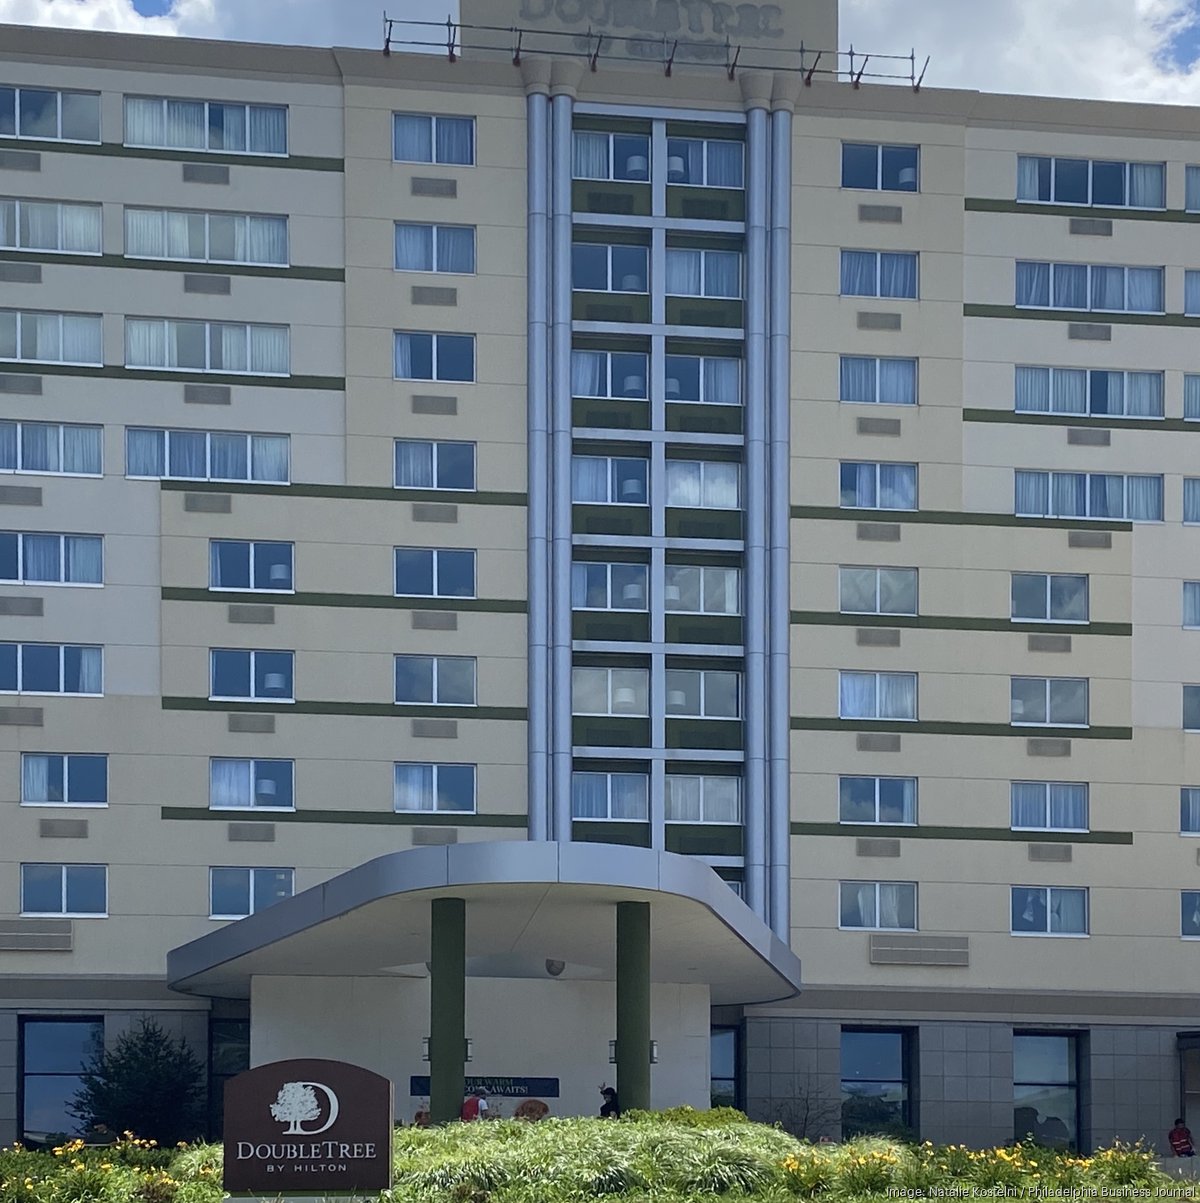 THE ALLOY KING OF PRUSSIA - A DOUBLETREE BY HILTON